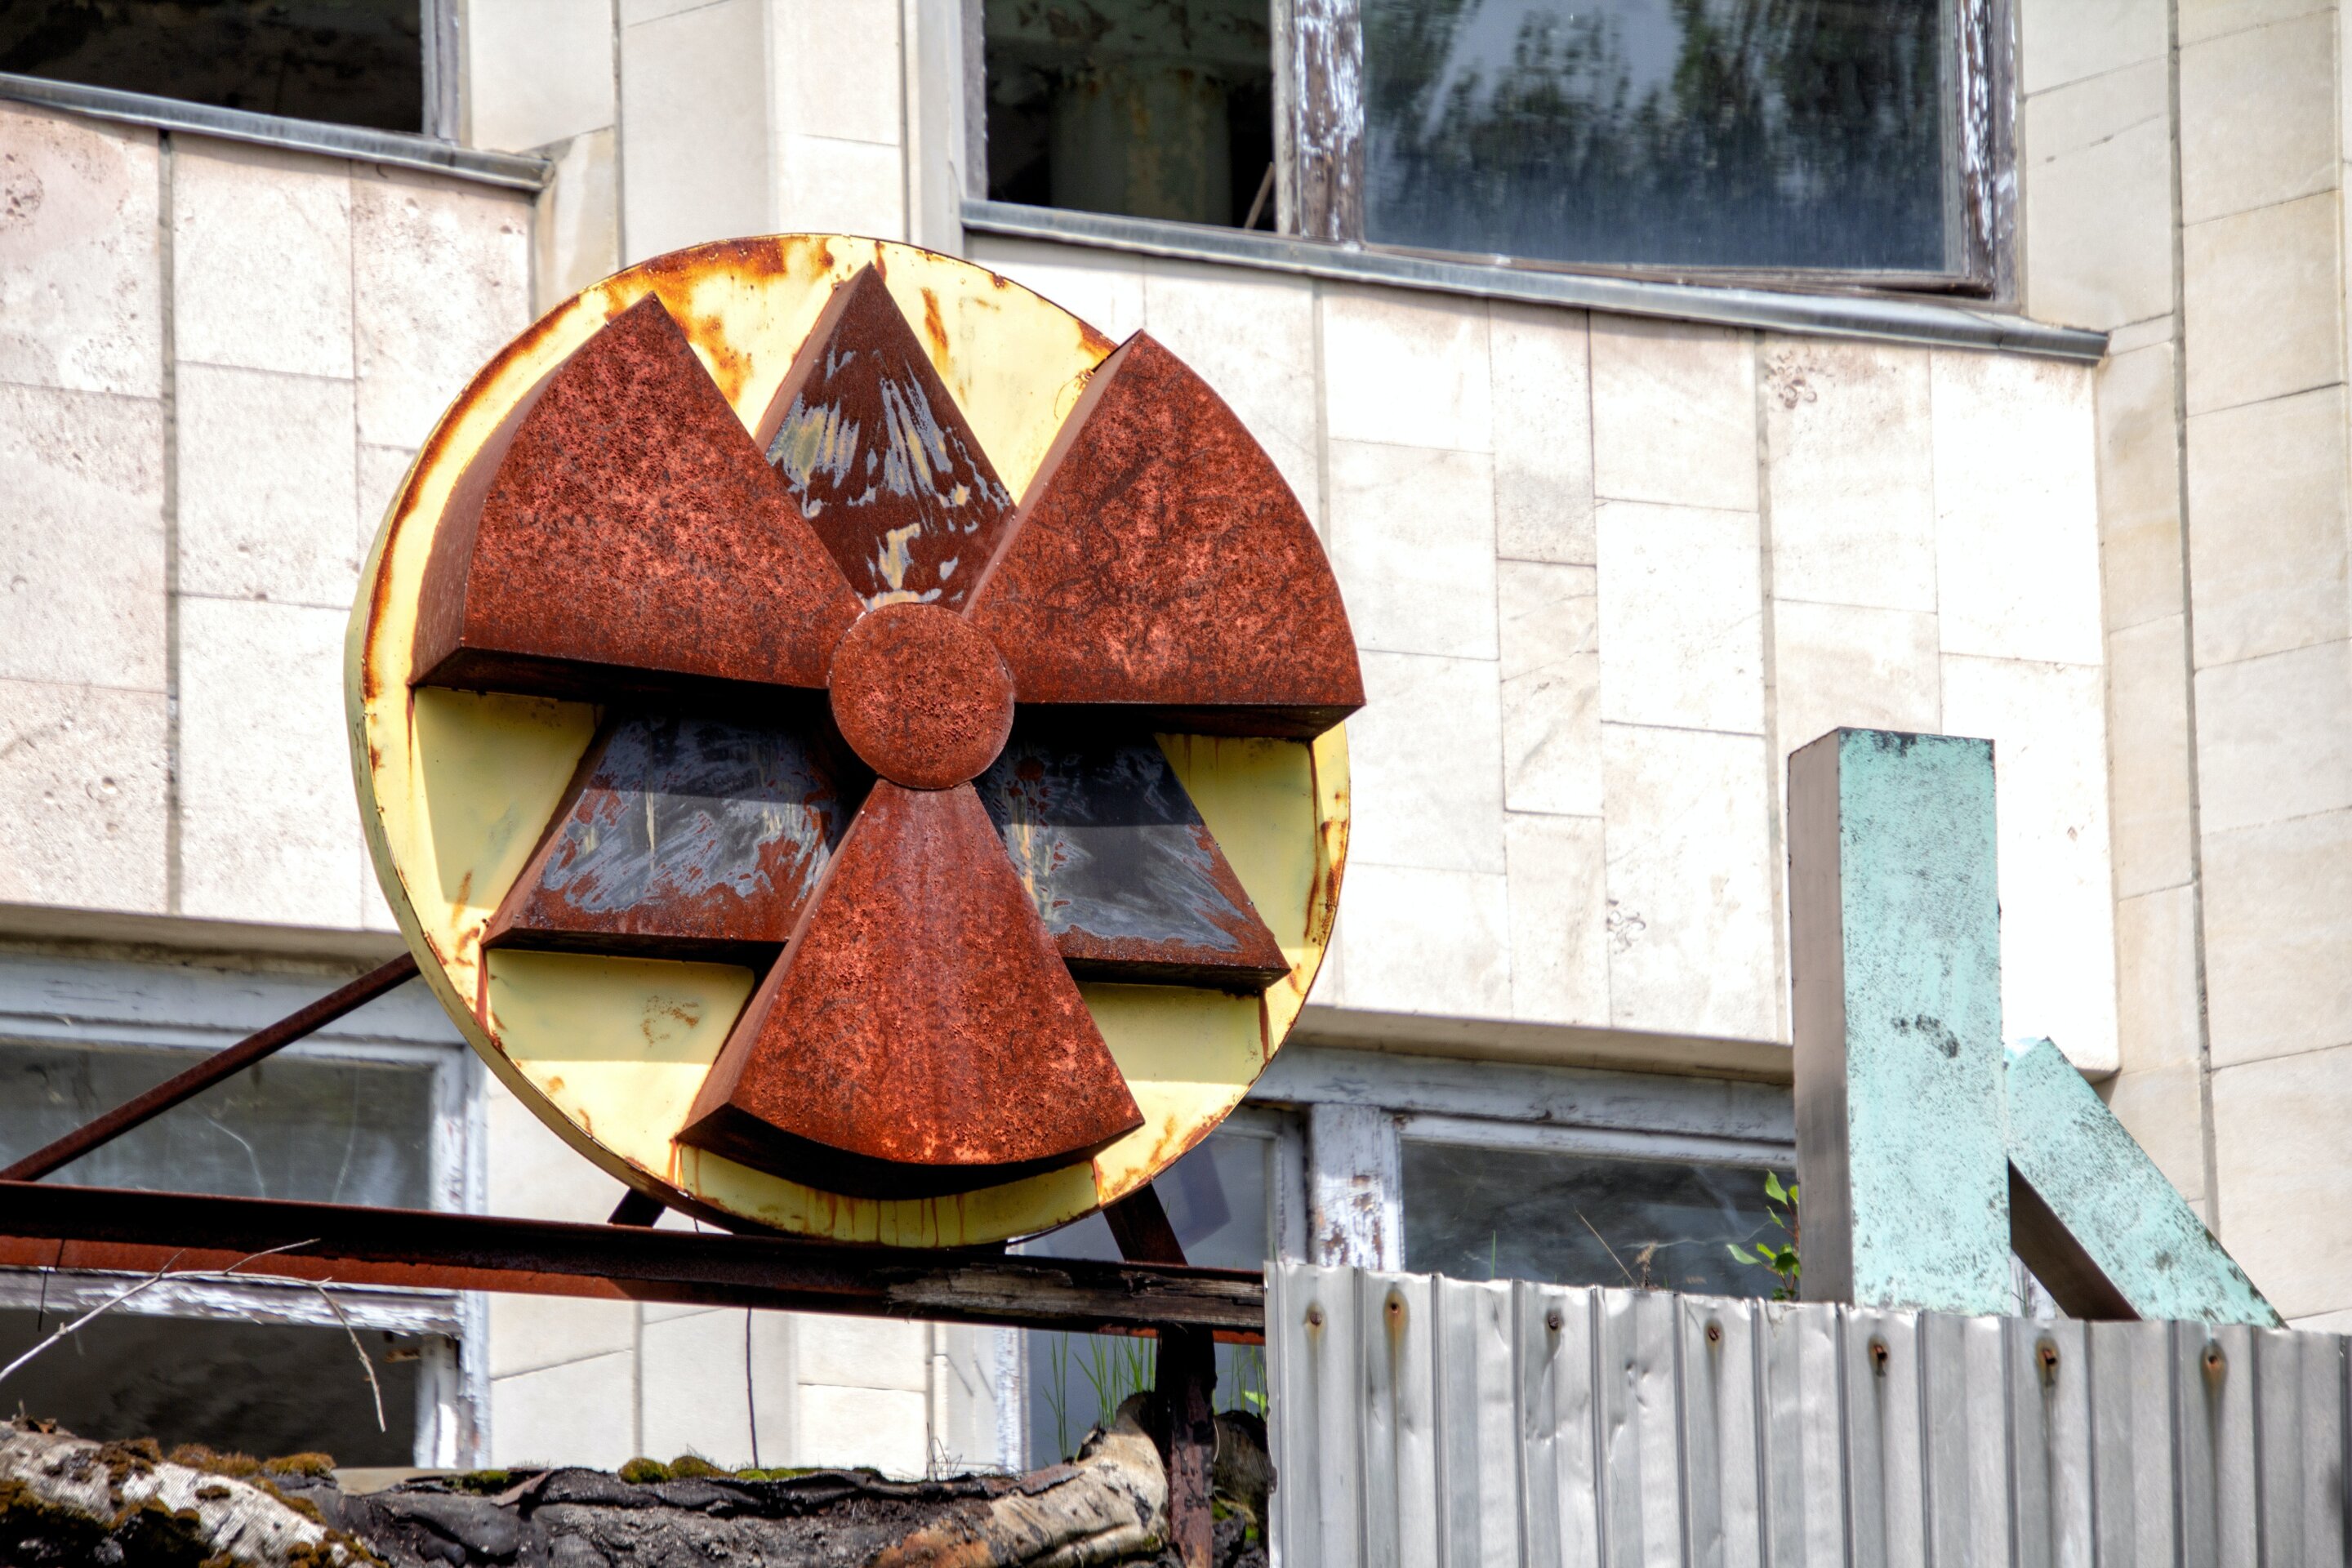 Chernobyl and Zaporizhzhia power cuts: Nervous wait as Ukraine nuclear power plants could start leaking radiation